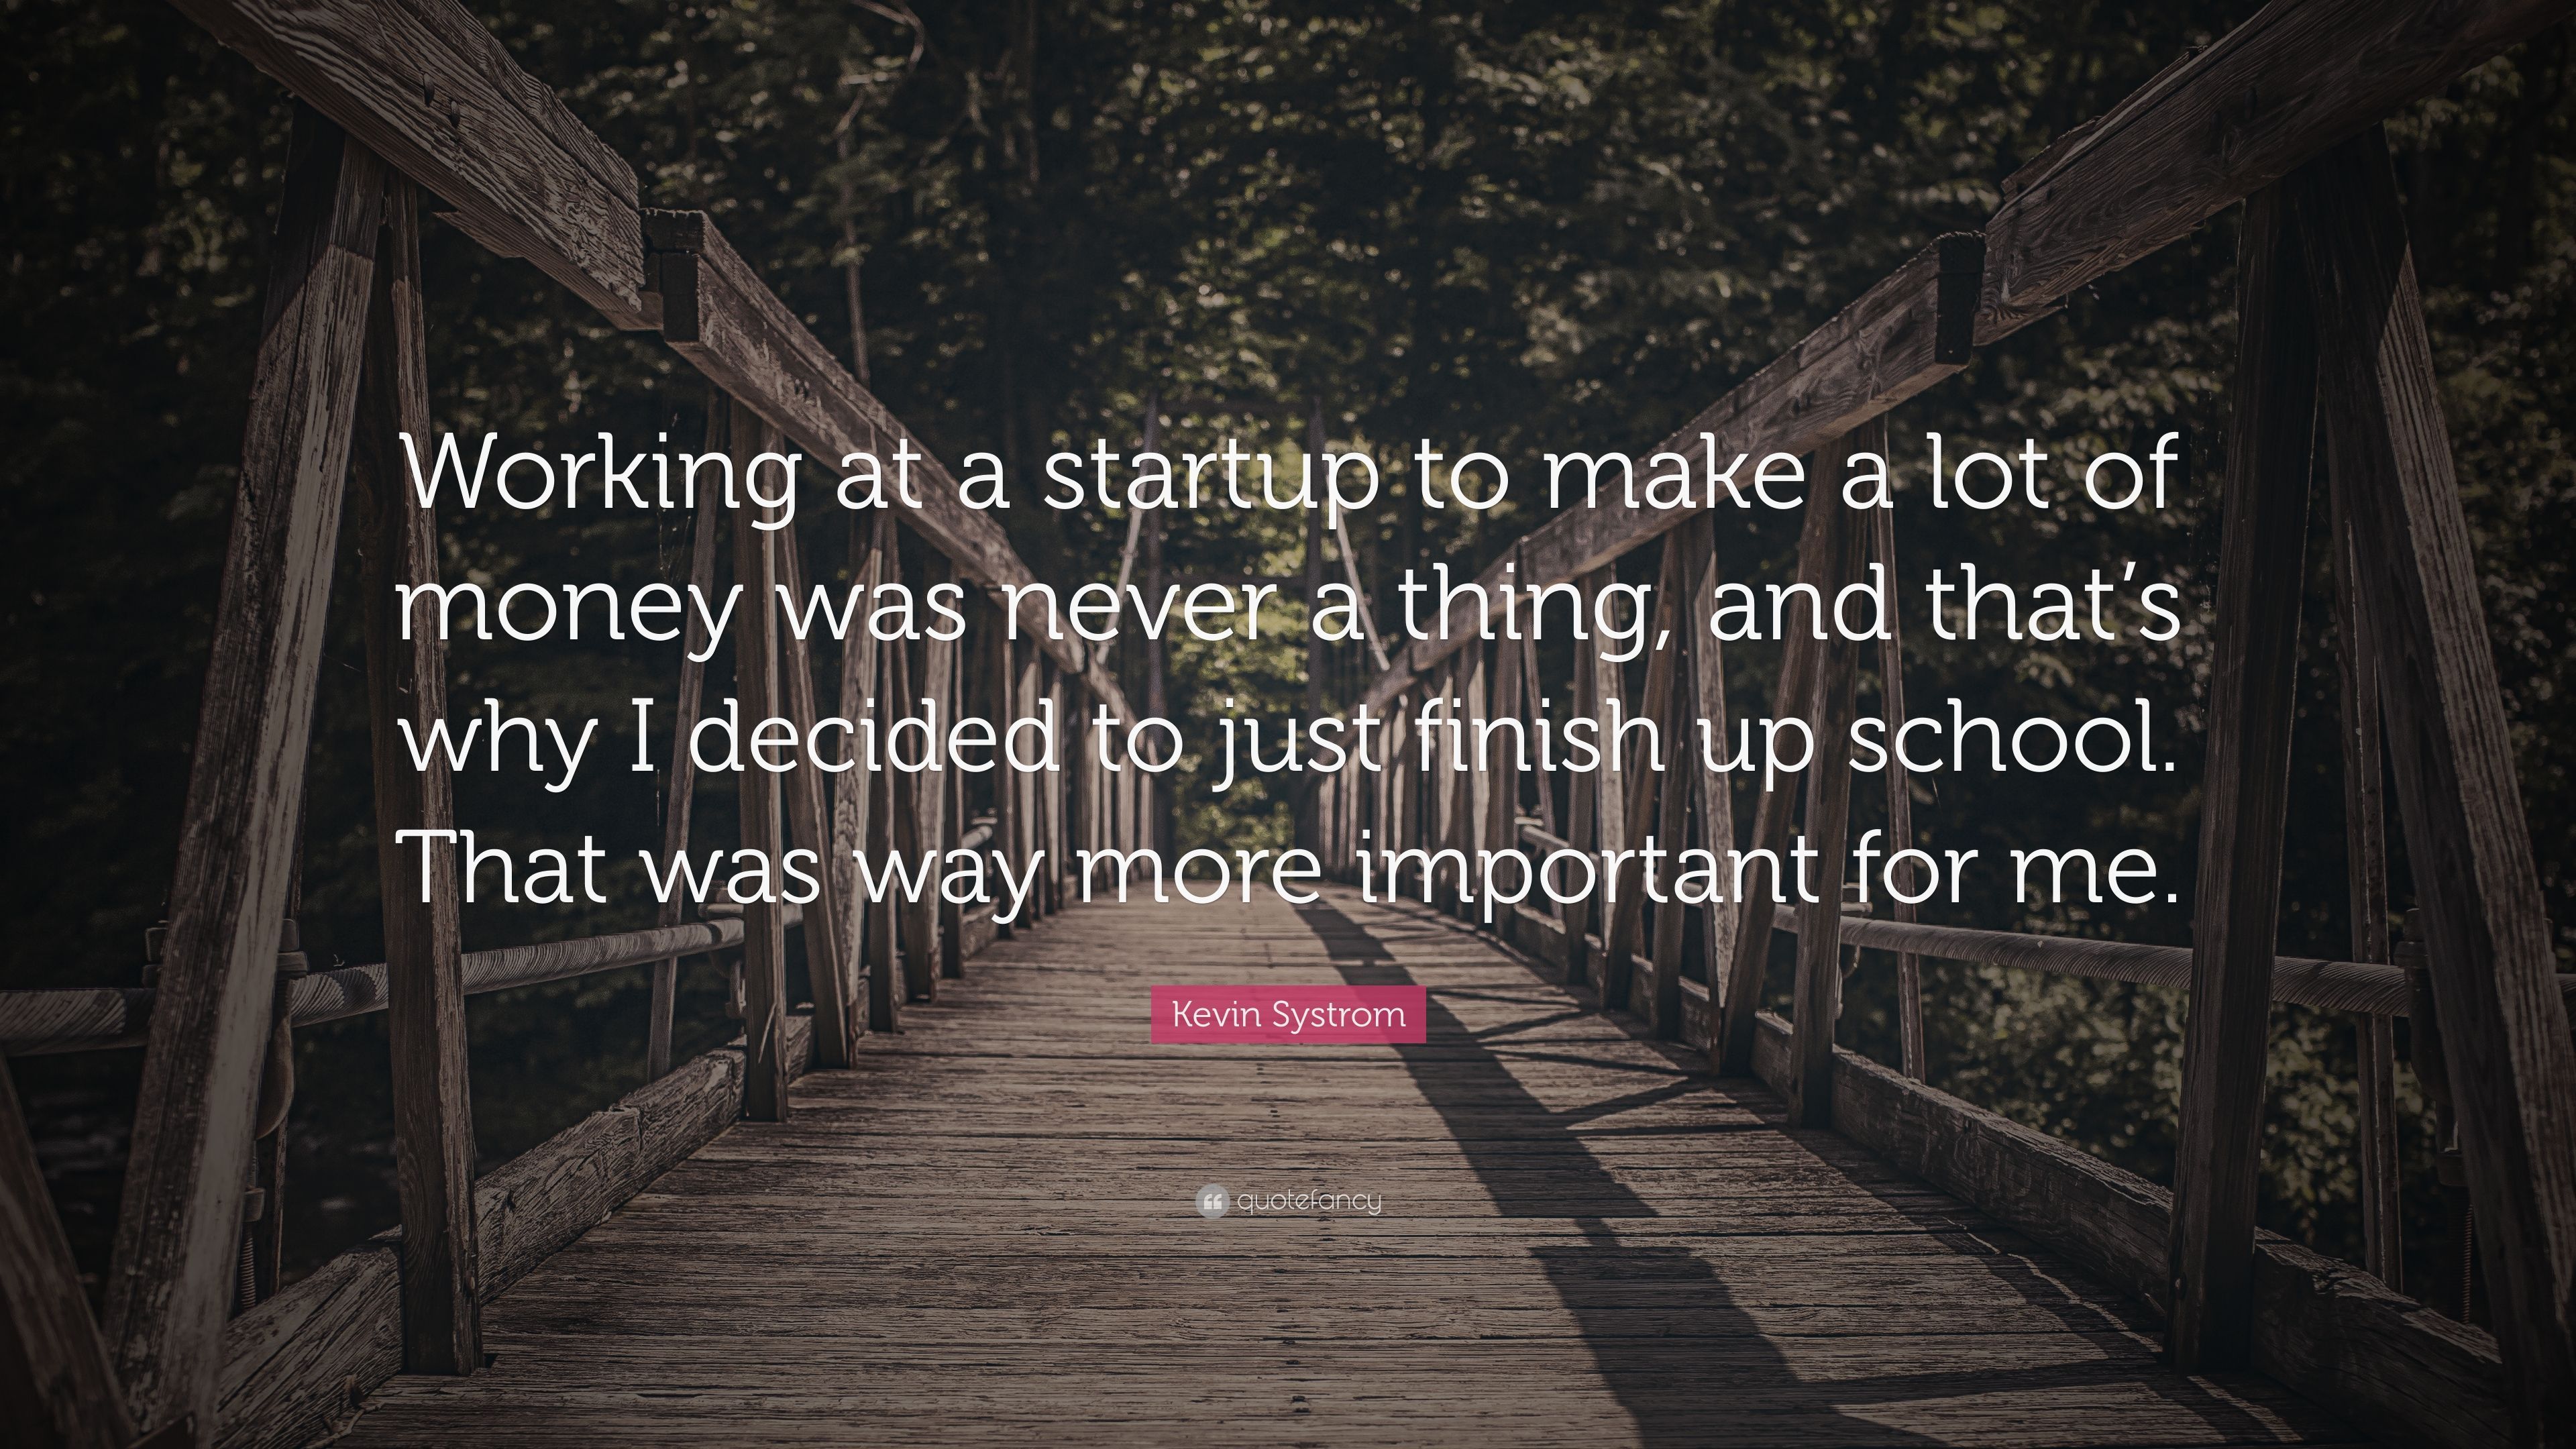 Kevin Systrom Quote: “Working at a startup to make a lot of money